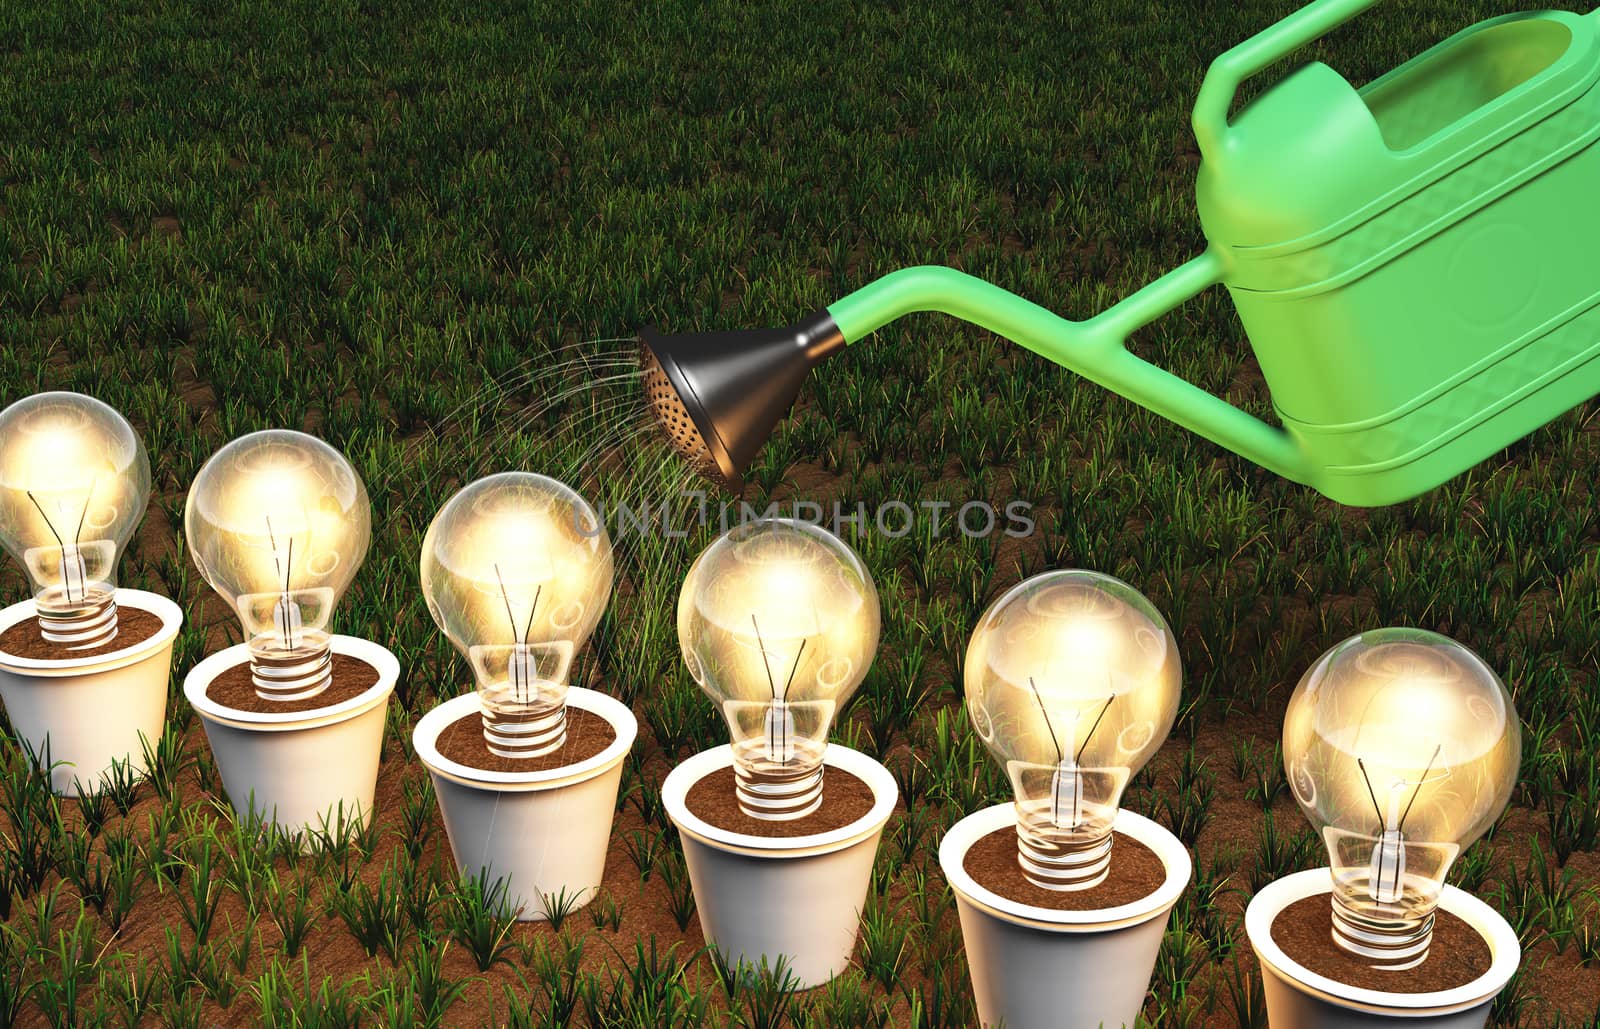 some lit light bulbs in white pots arranged in a row are watered by a green watering can, on a grassy ground